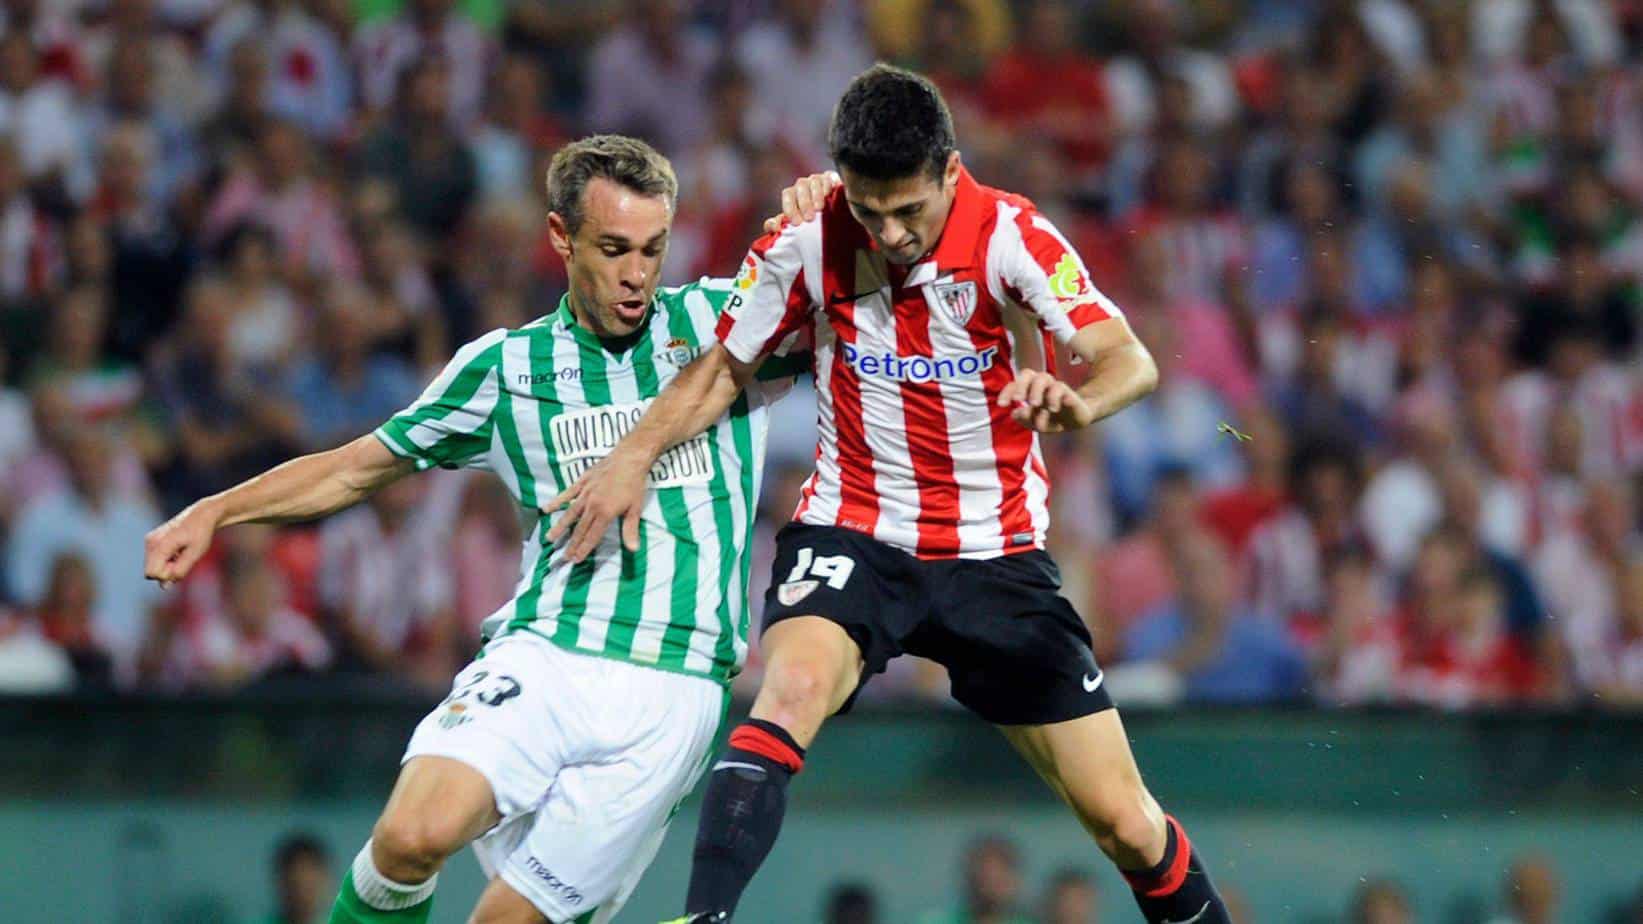 Athletic Club vs. Betis – Betting Odds and Free Pick